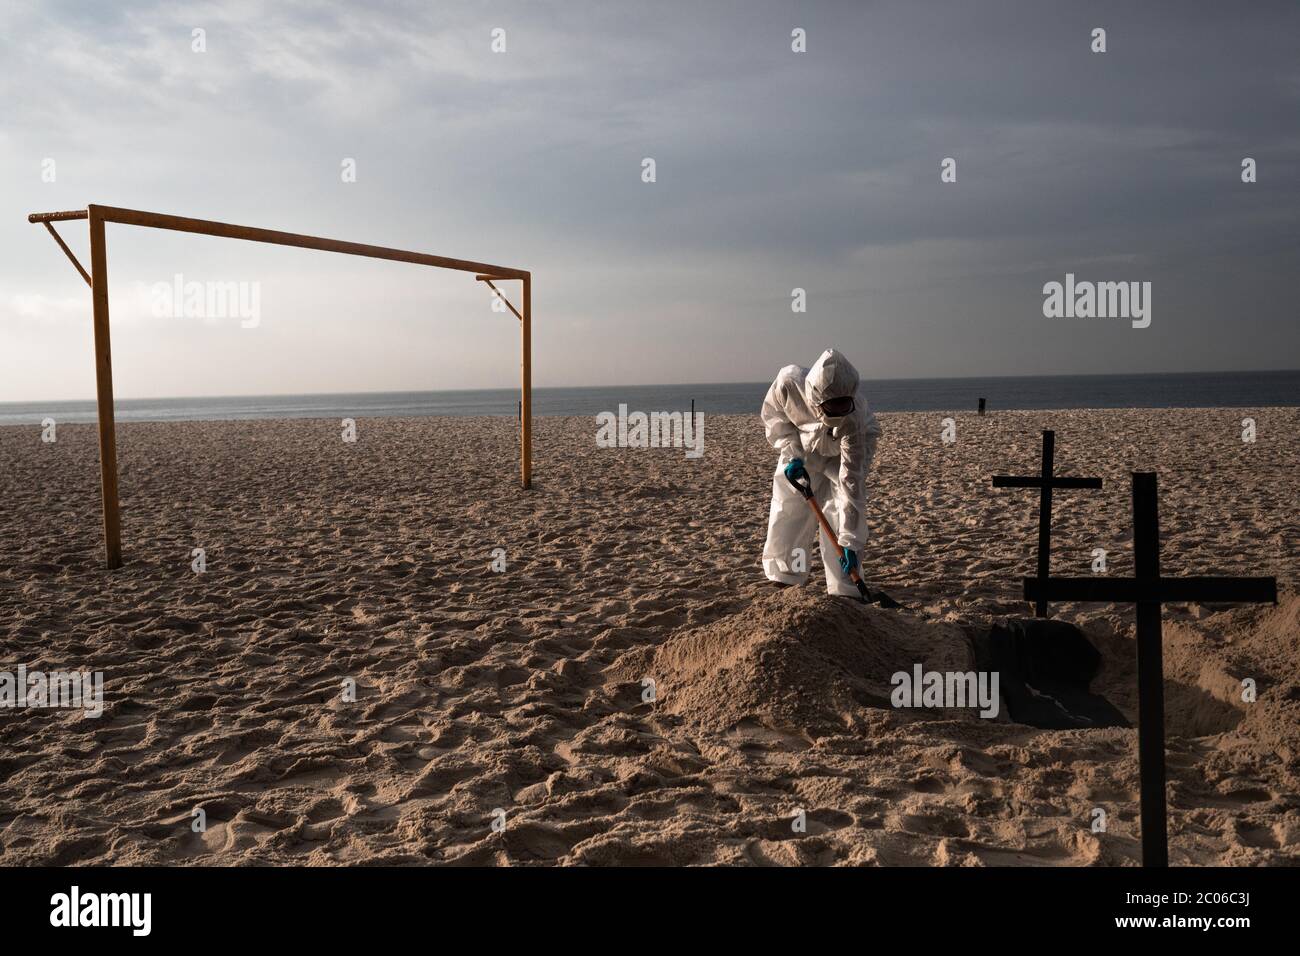 Rio De Janeiro, Brazil. 11th June, 2020. An activist of the NGO Rio de Paz in a protective suit digs graves on Copacabana beach to symbolize the Corona victims in a protest against the government's handling of the crisis. Brazil is the most affected country in Latin America by the corona virus pandemic. Credit: Ian Cheibub/dpa/Alamy Live News Stock Photo